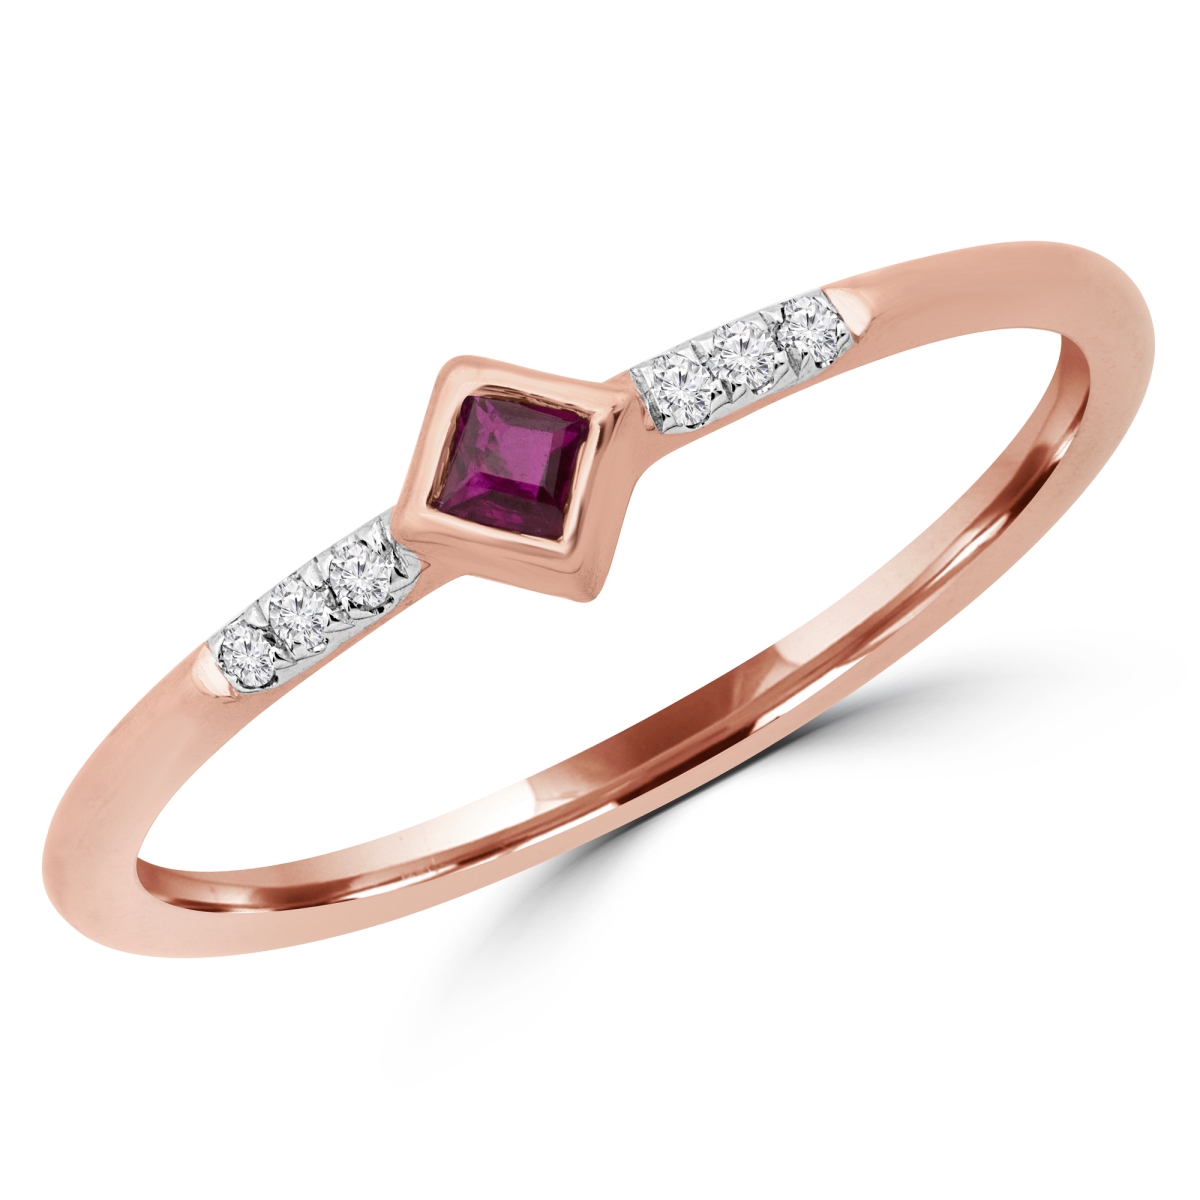 Picture of Majesty Diamonds MDR190078-8.25 0.1 CTW Round Red Ruby Bezel Set Cocktail Ring in 14K Rose Gold - Size 8.25